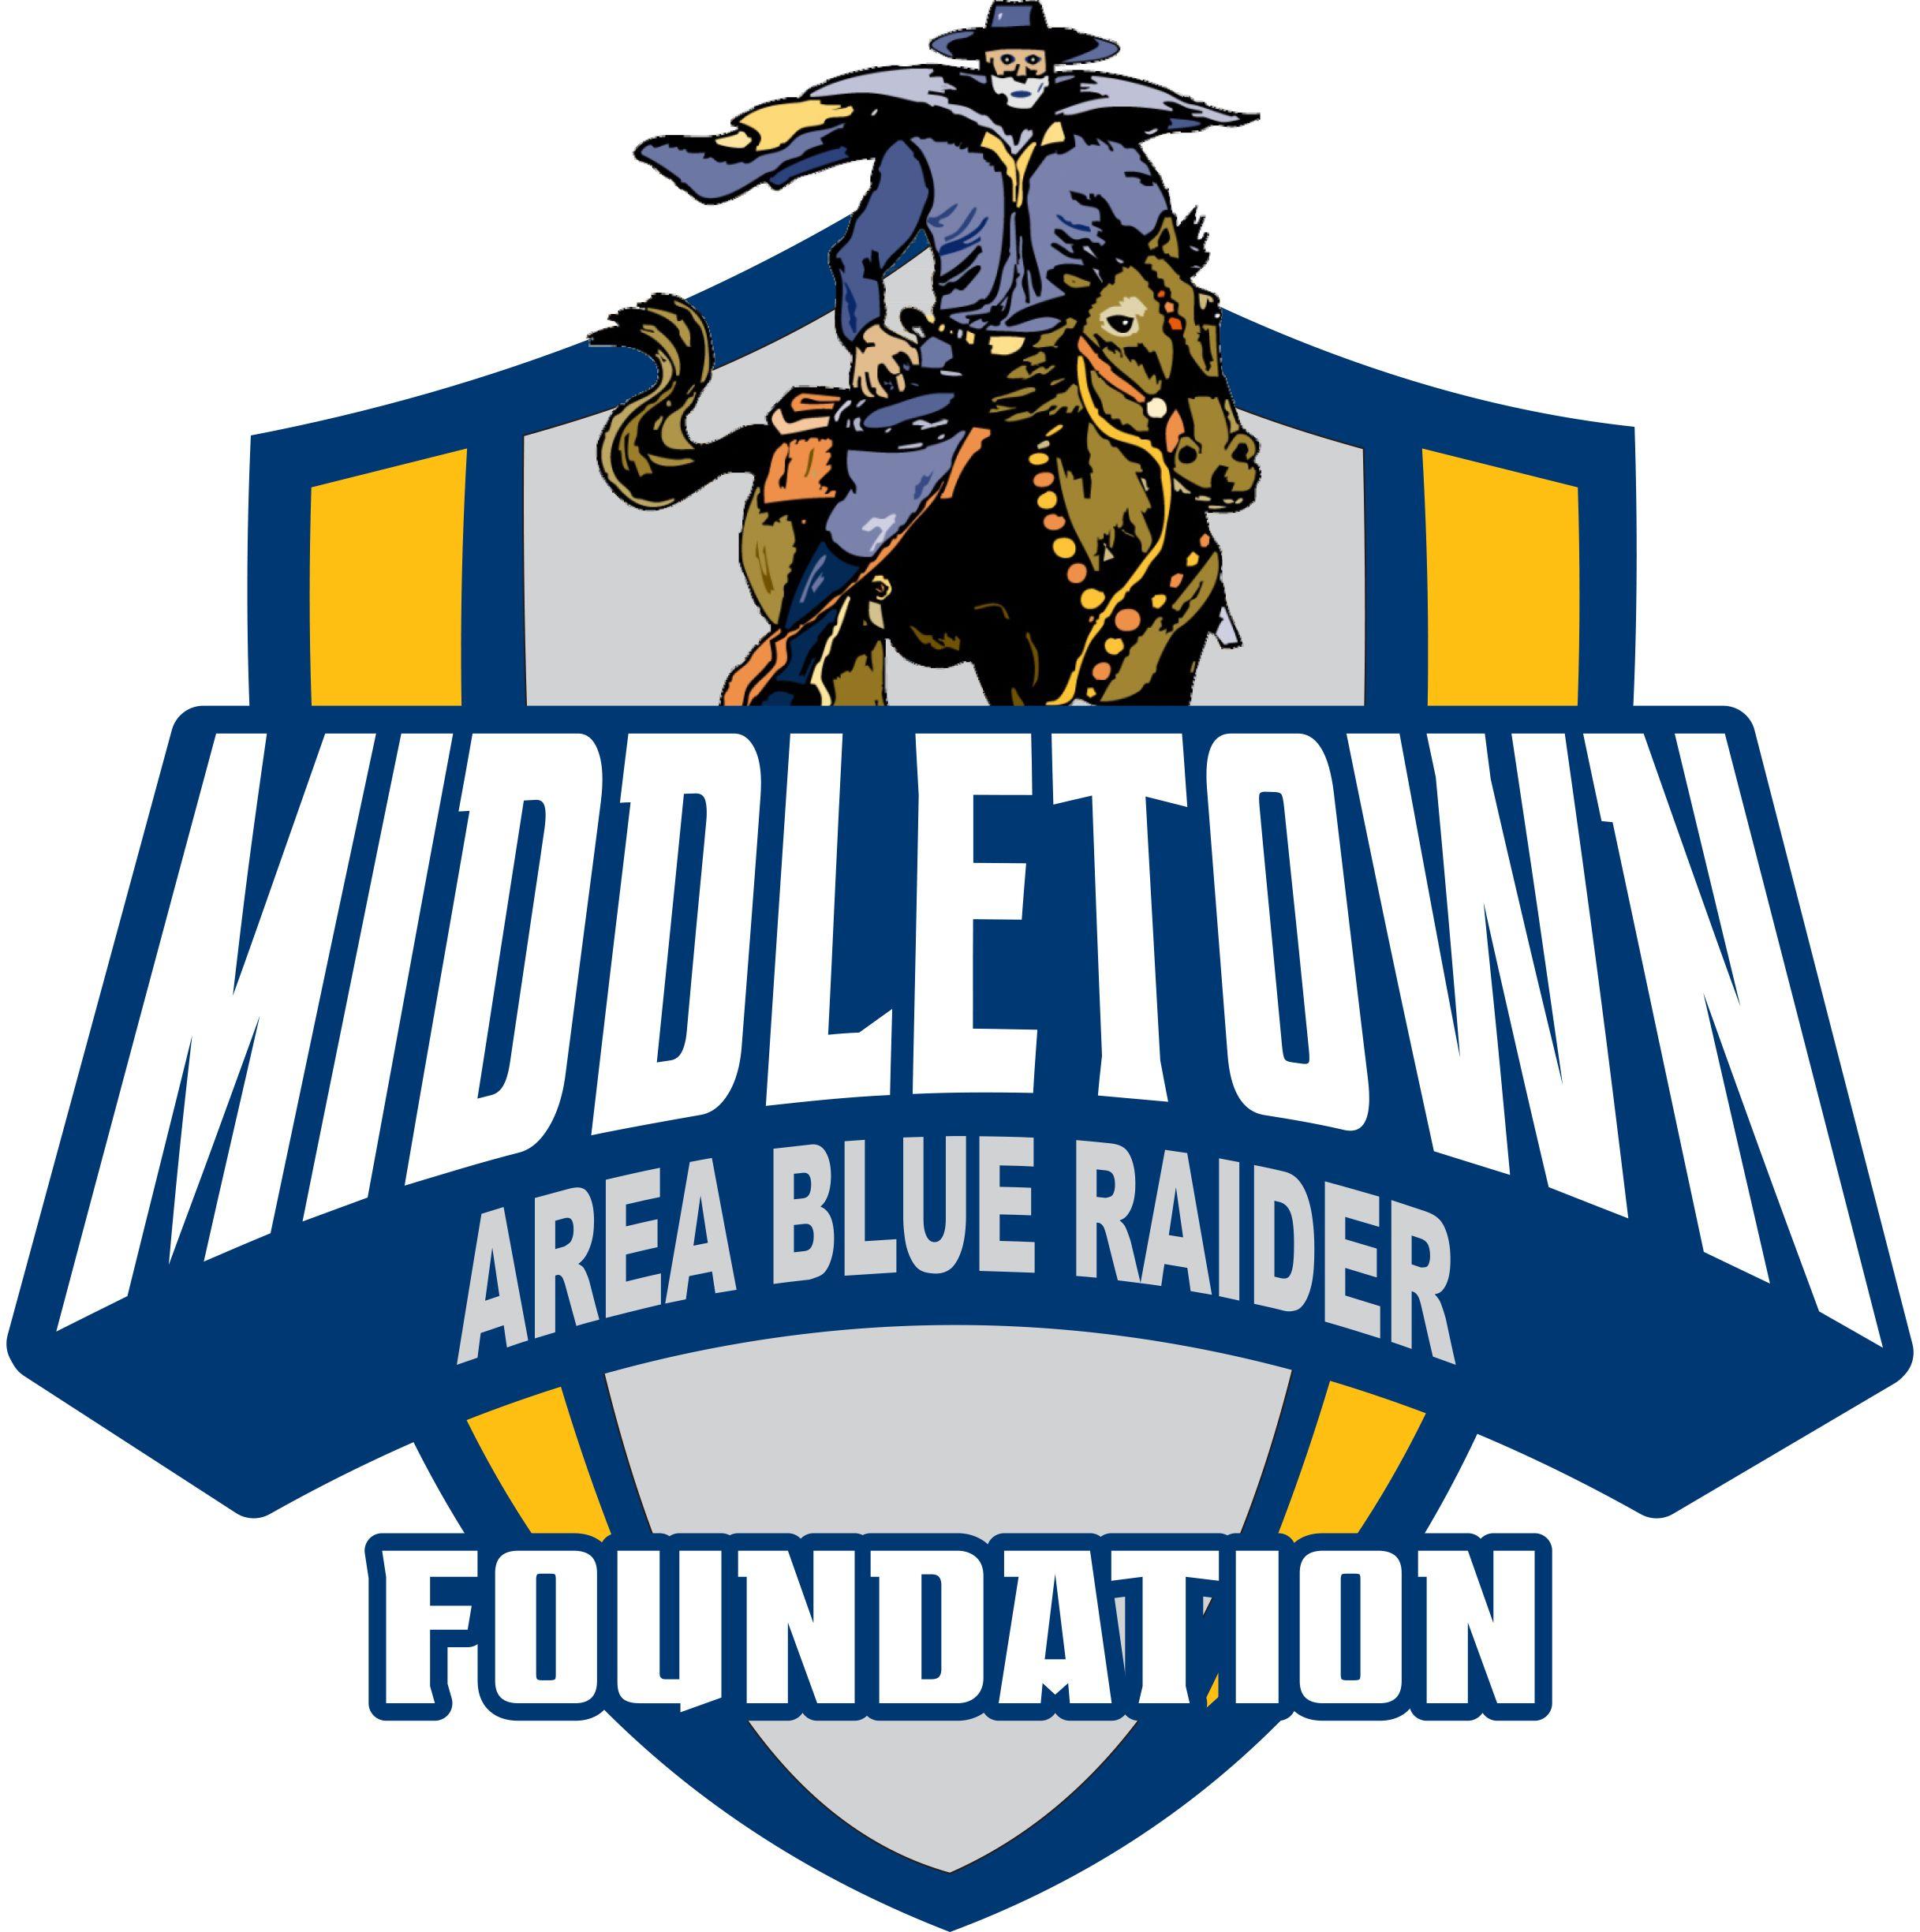 Blue Raiders Logo - Middletown Area Blue Raider Foundation. Welcome to the Middletown